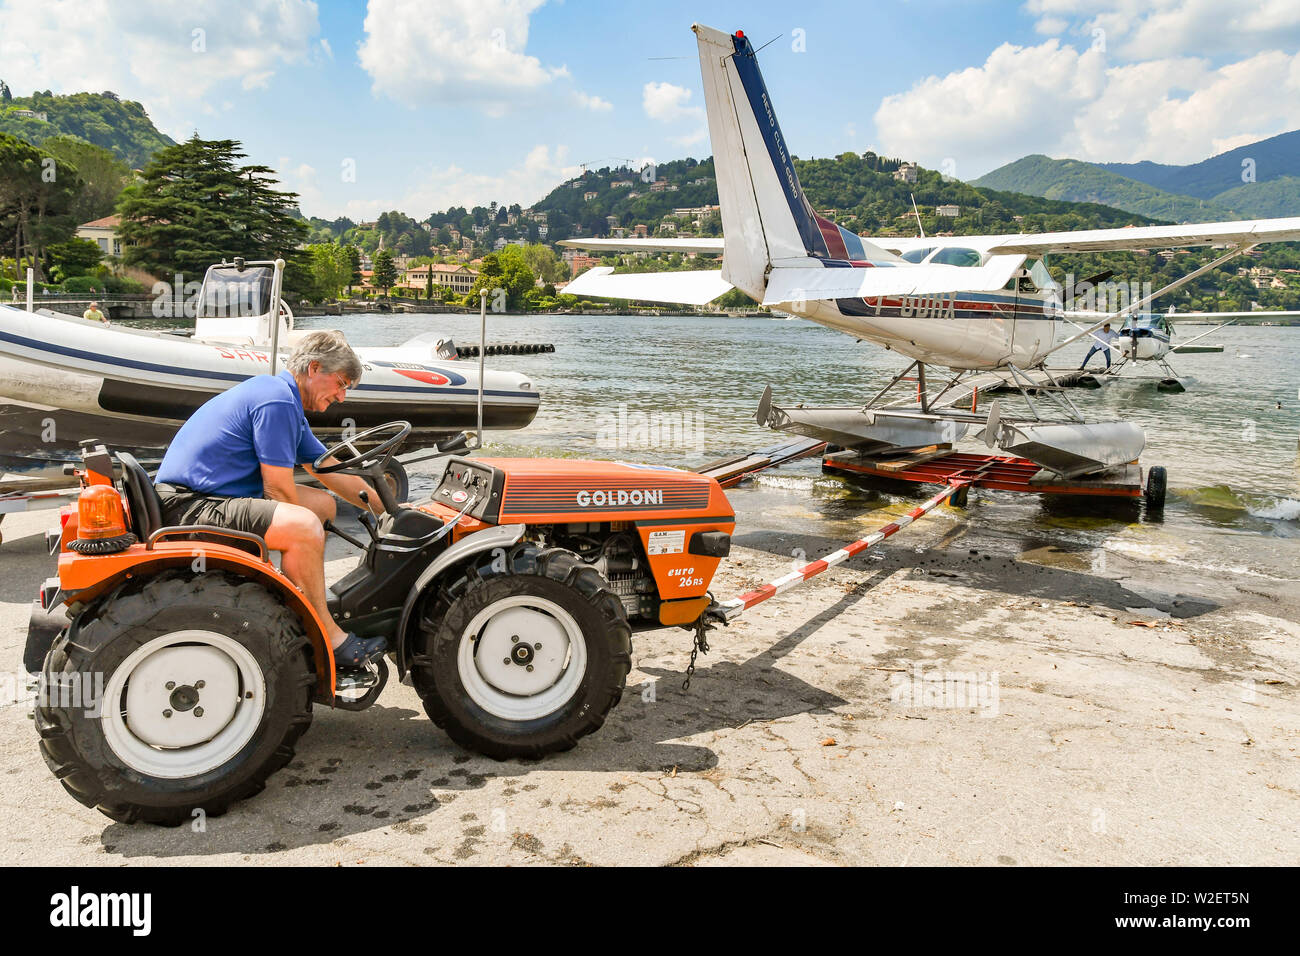 COMO, LAKE COMO, ITALY - JUNE 2019: Floatplane operated by the Aero Club Como being pushed by a small tractor into the waters of Lake Como. Stock Photo